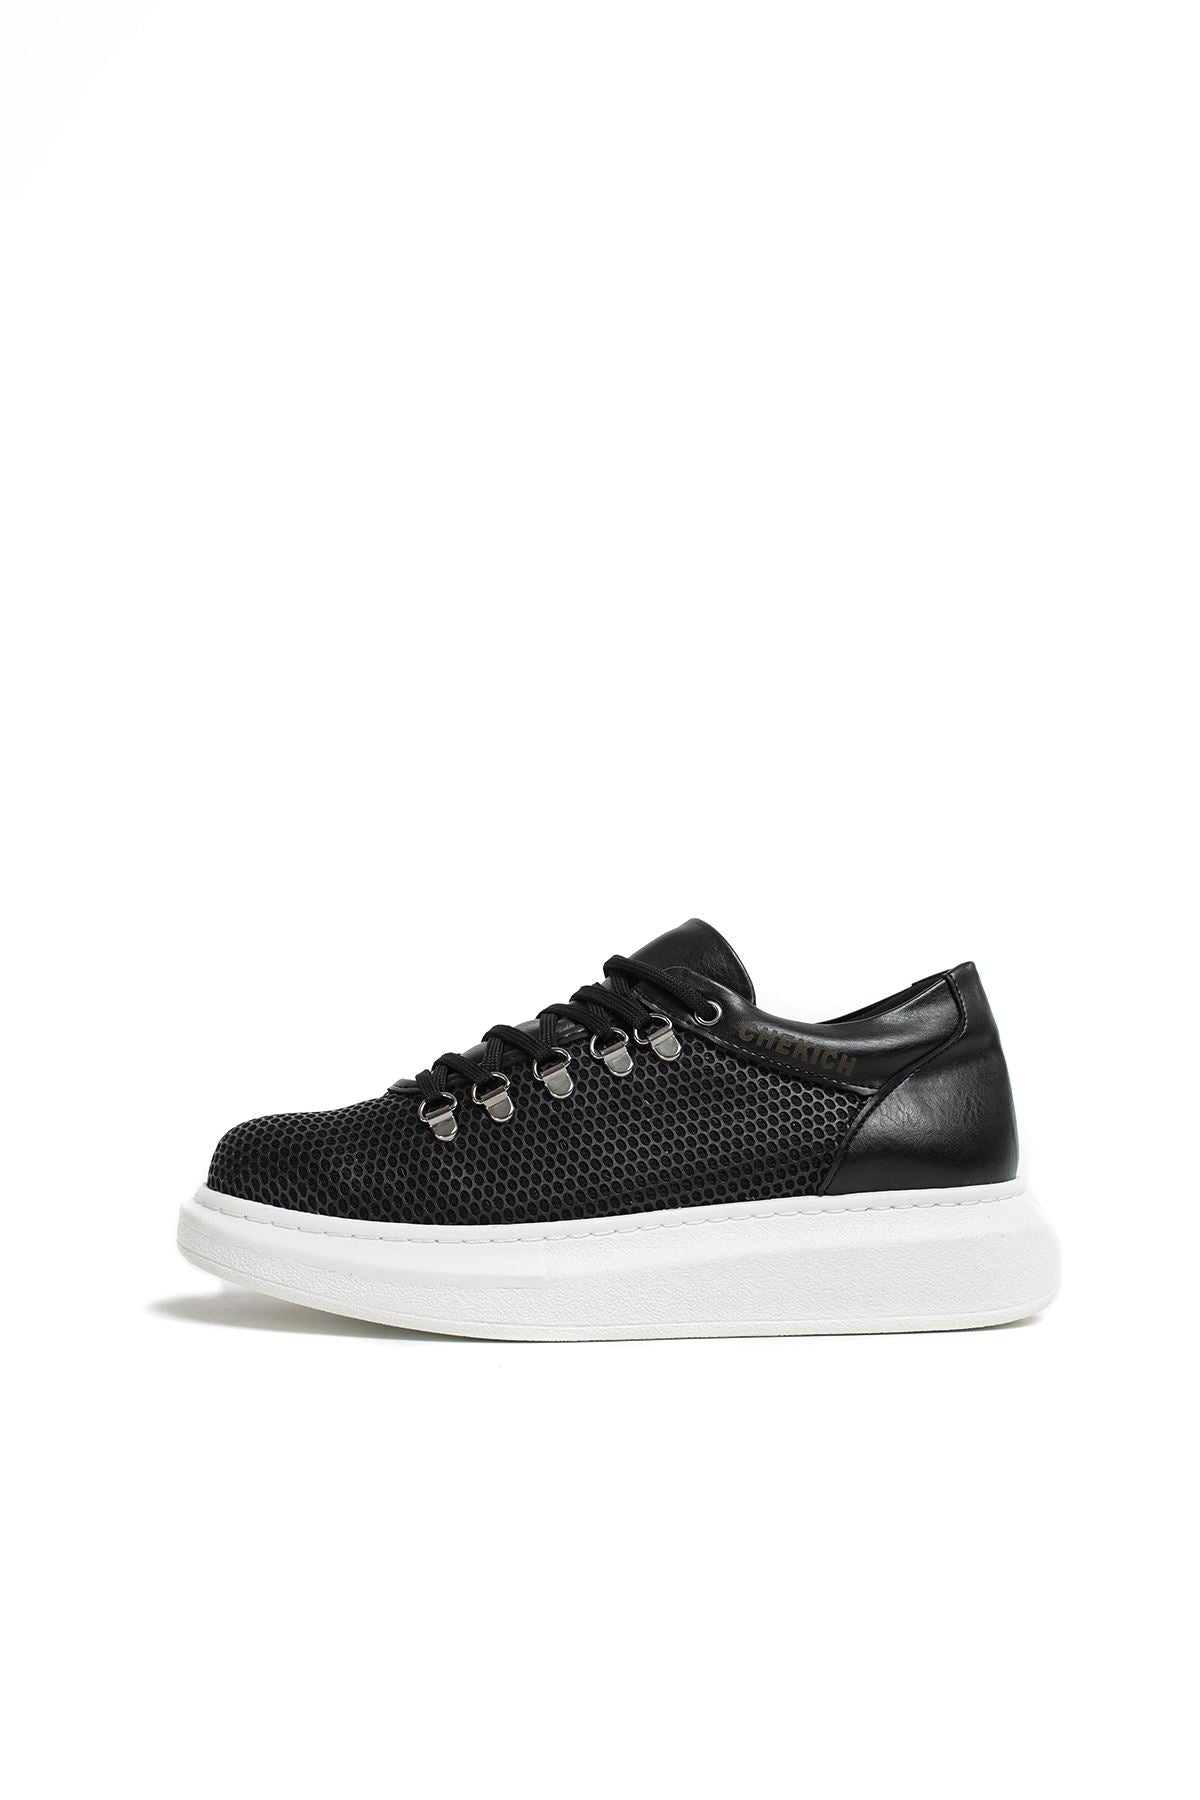 CH021 Men's Unisex Black-White Sole Honeycomb Processing Casual Sneaker Sports Shoes - STREETMODE™